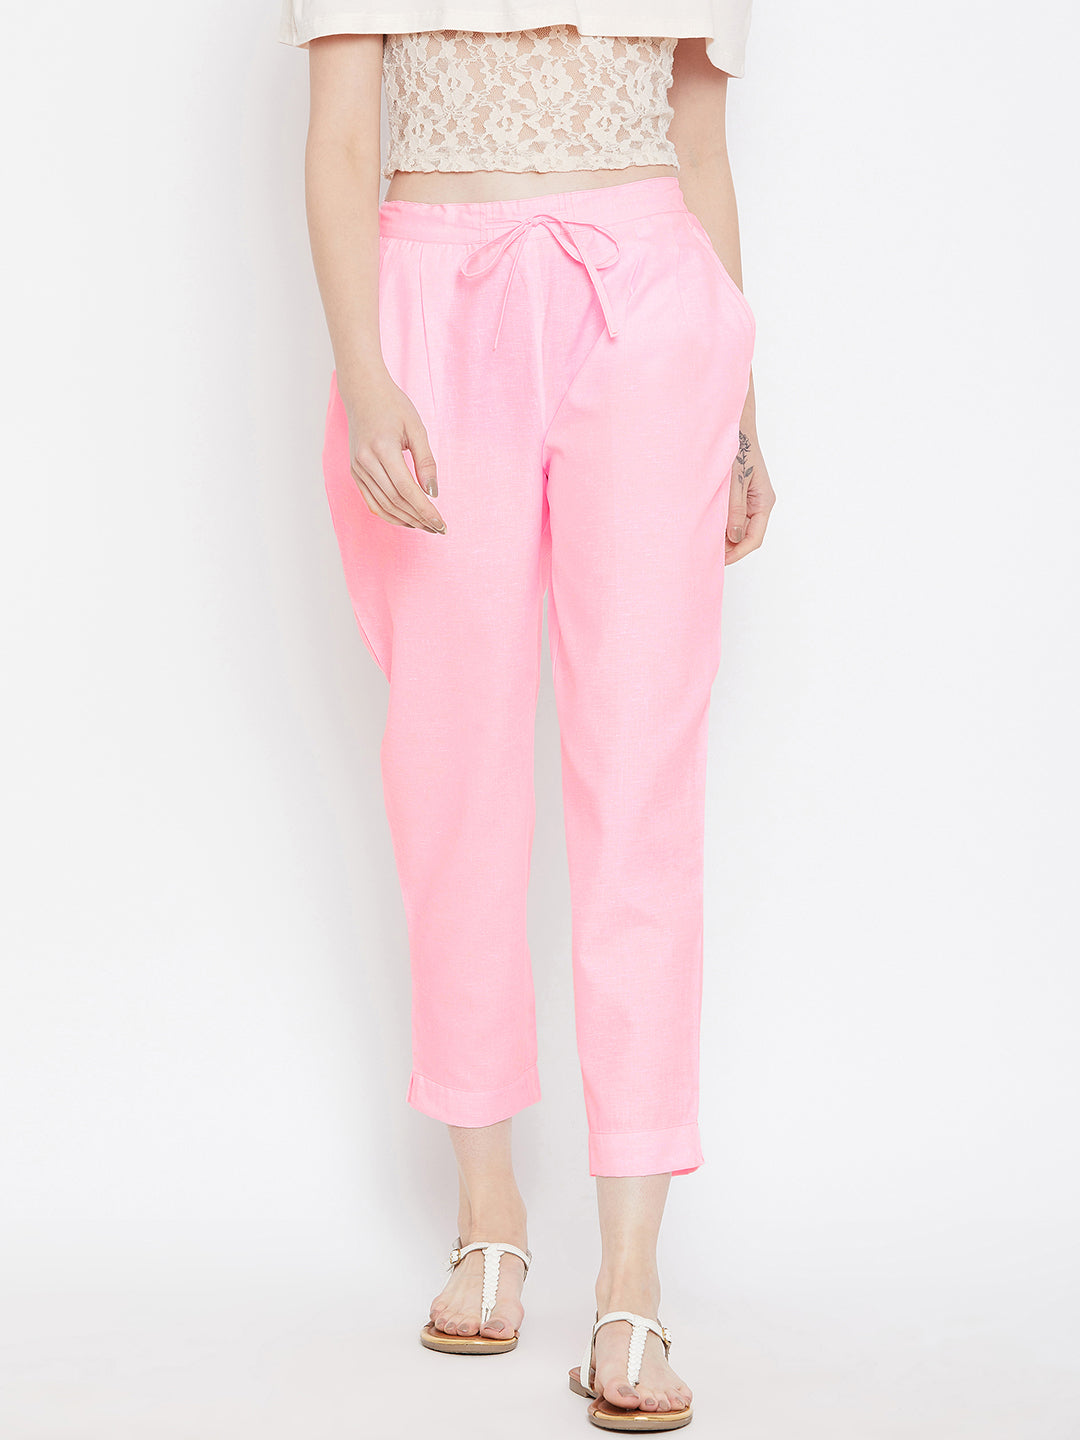 Pink Relaxed Fit Trouser (Sku- BLMD1901).